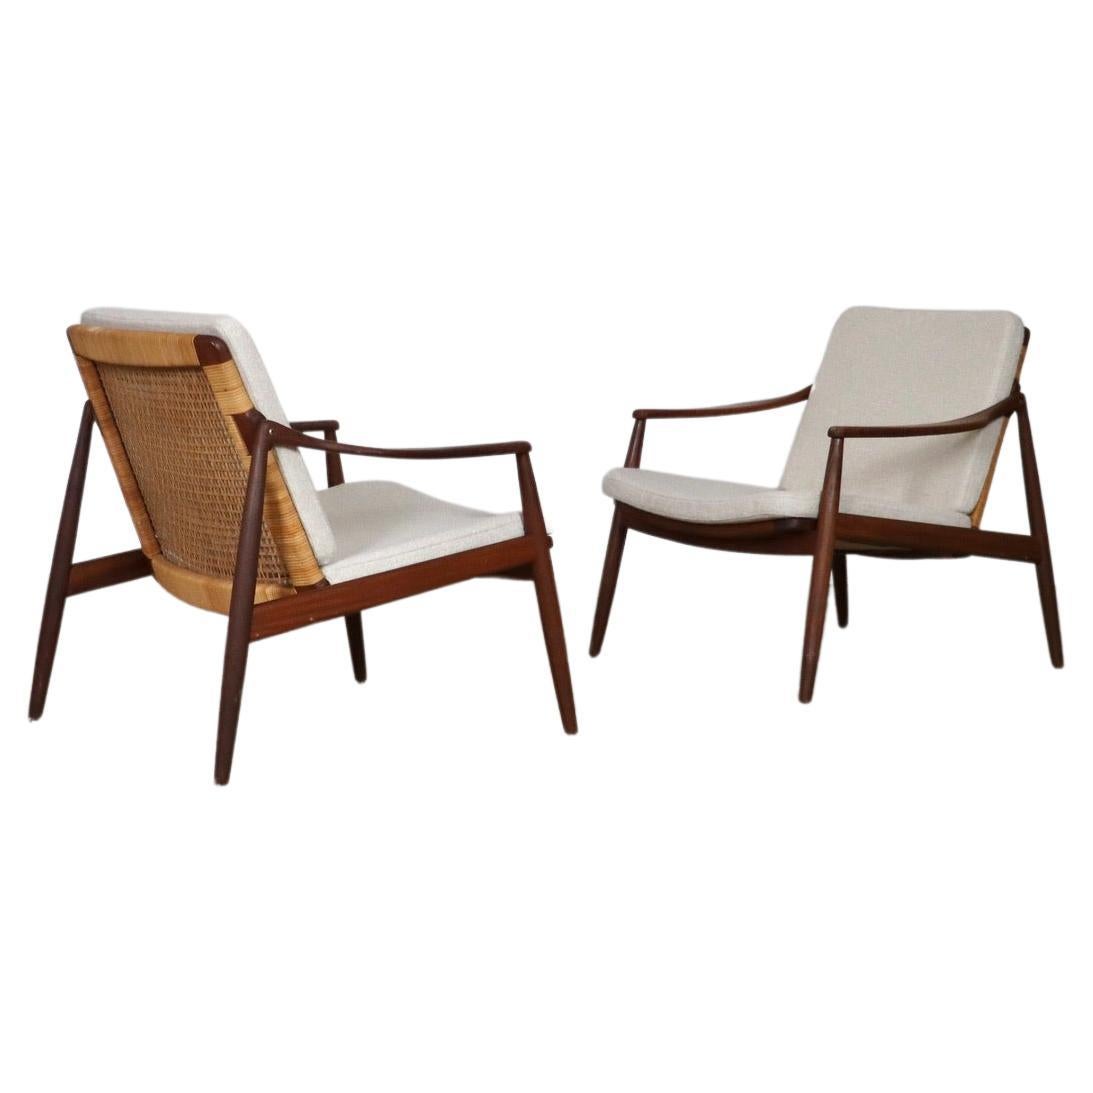 Pair Of Hartmut Lohmeyer Model 400 Lounge Chairs For Wilkhahn, 1959 For Sale